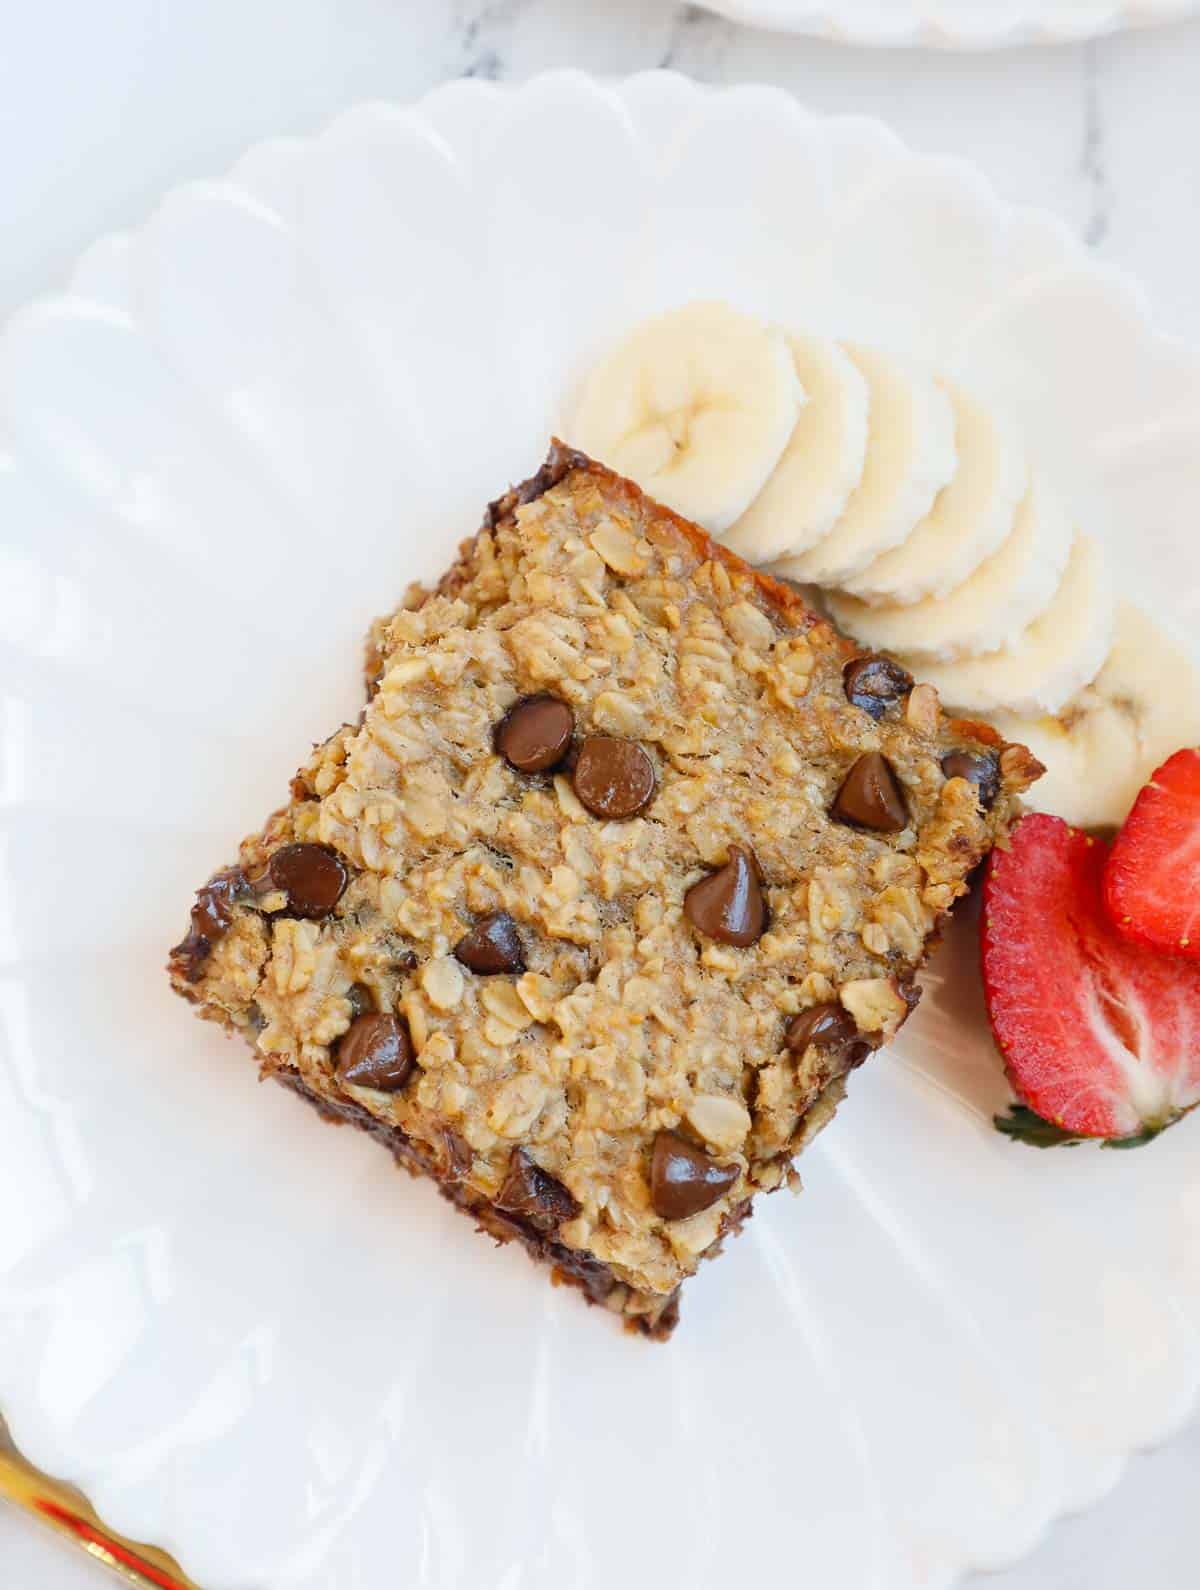 baked oatmeal with chocolate chips on a plate with fruit.